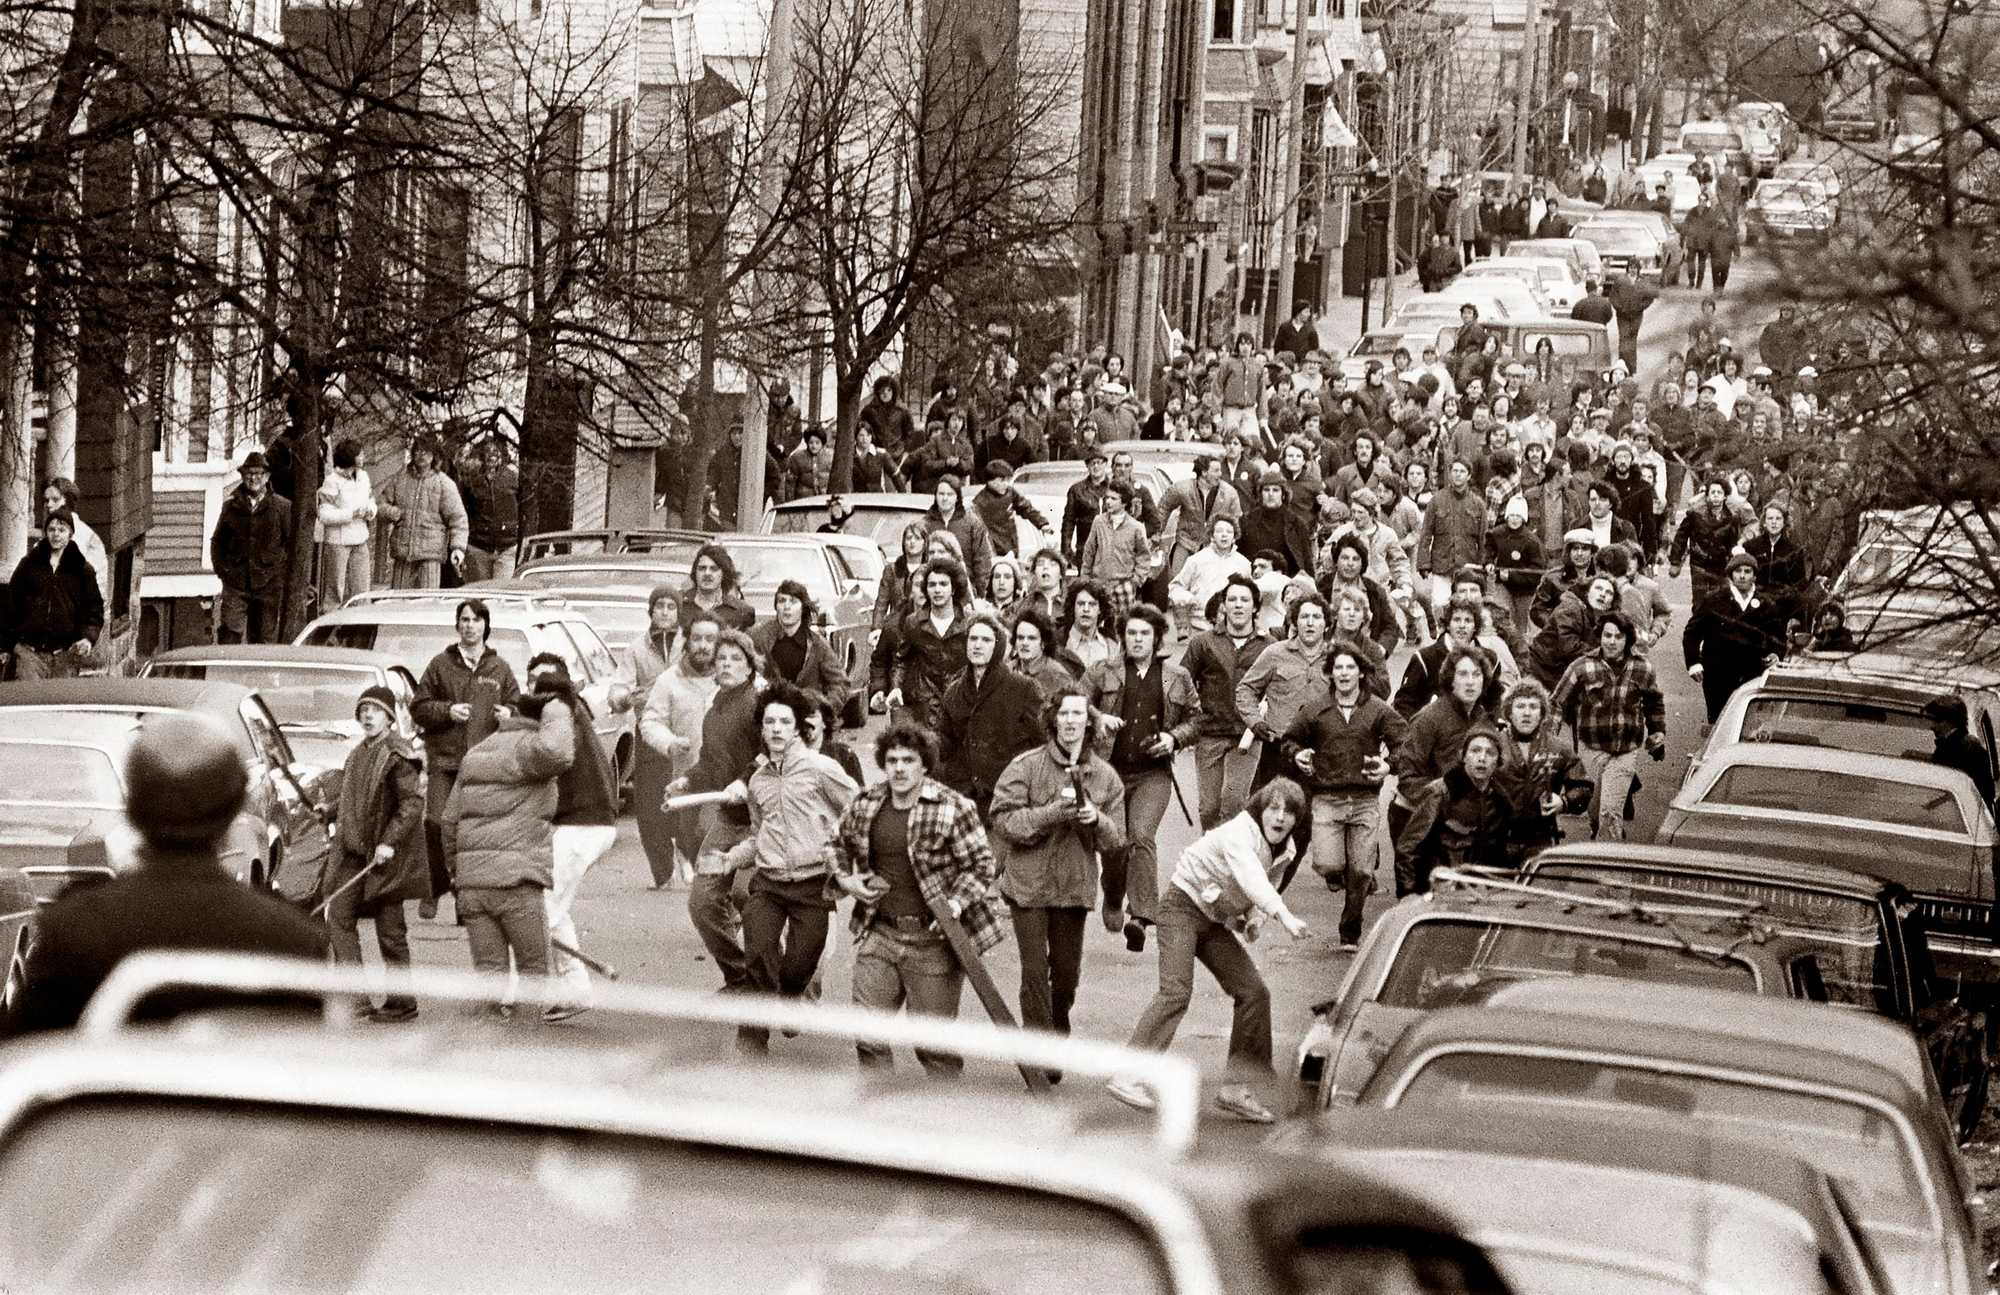 A crowd of antibusing demonstrators stormed up East Sixth Street in South Boston, armed with rocks and clubs on Feb. 15, 1976. A demonstration erupted into two hours of bitter street fighting between protestors and police, who used tear gas to disperse the crowd. (Ulrike Welsch/Globe Staff) 